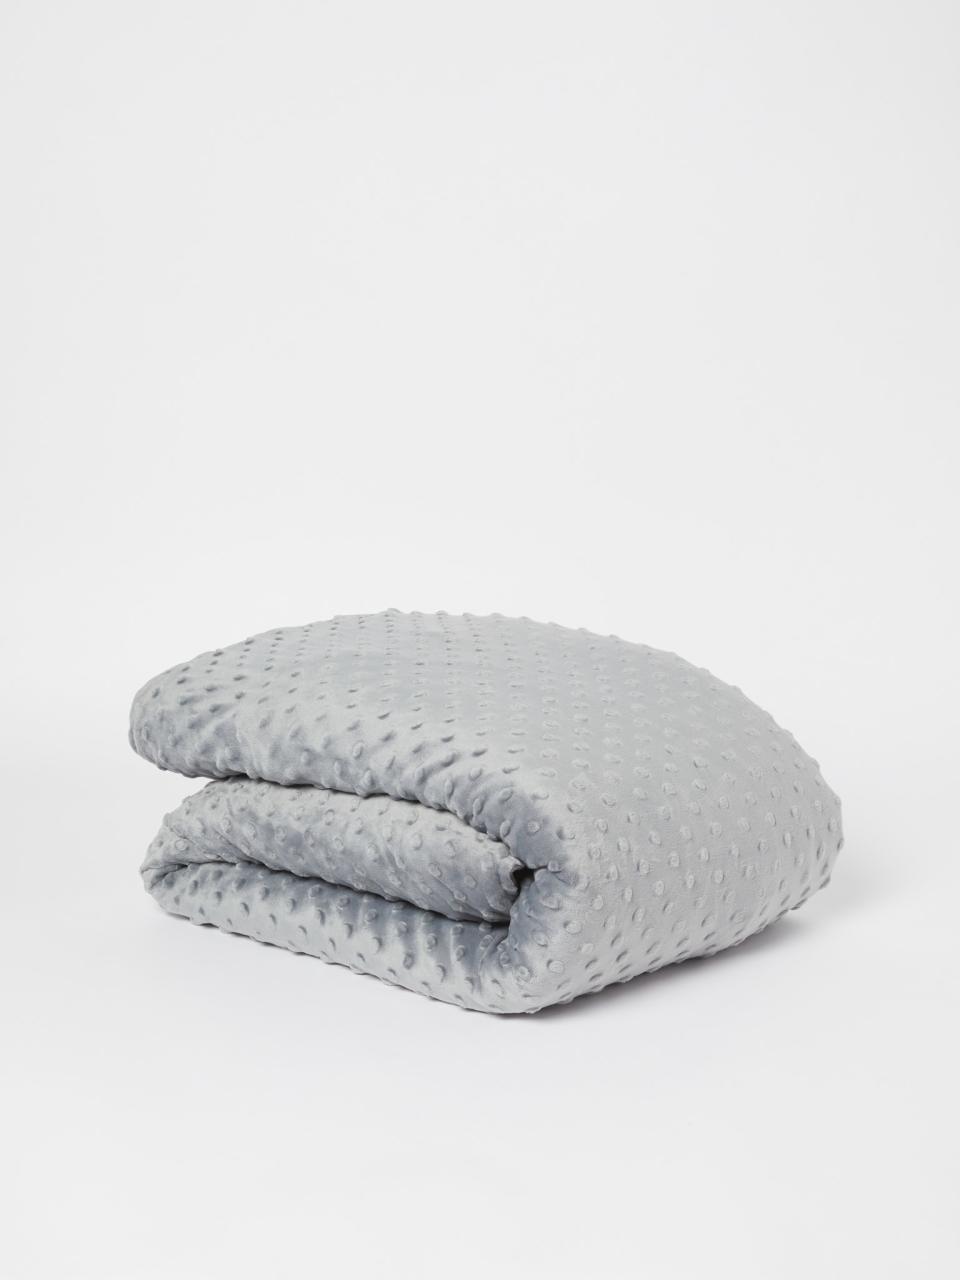 2) 12-lb. Weighted Blanket